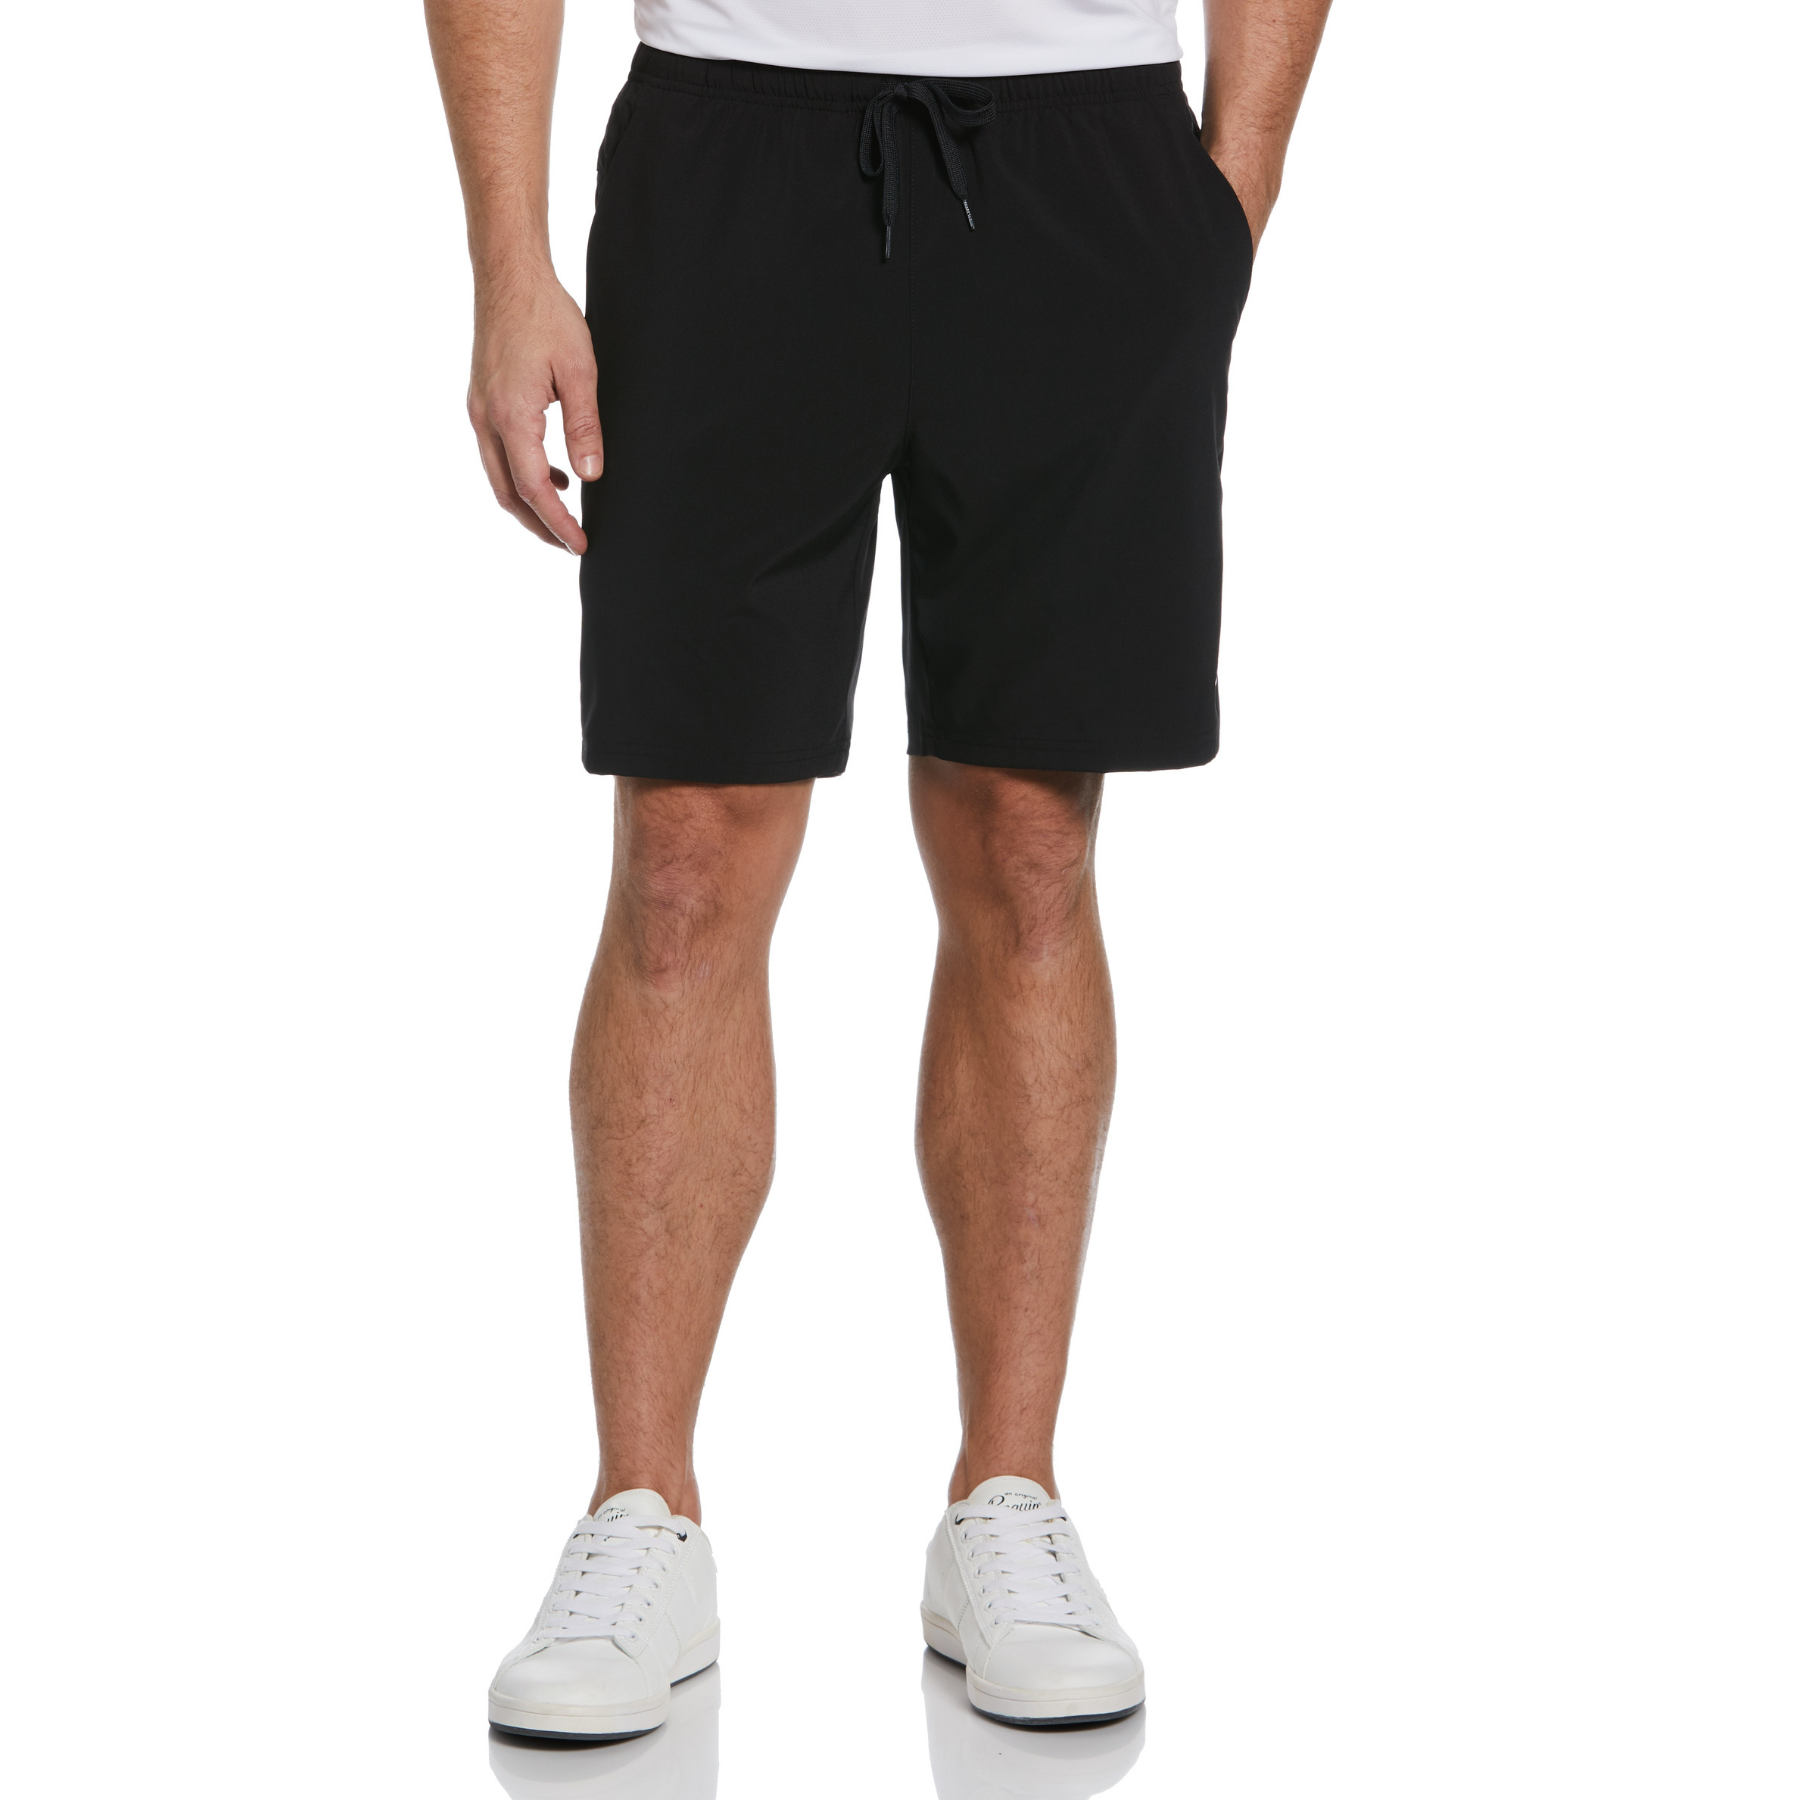 View Performance Solid Tennis Short In Caviar information